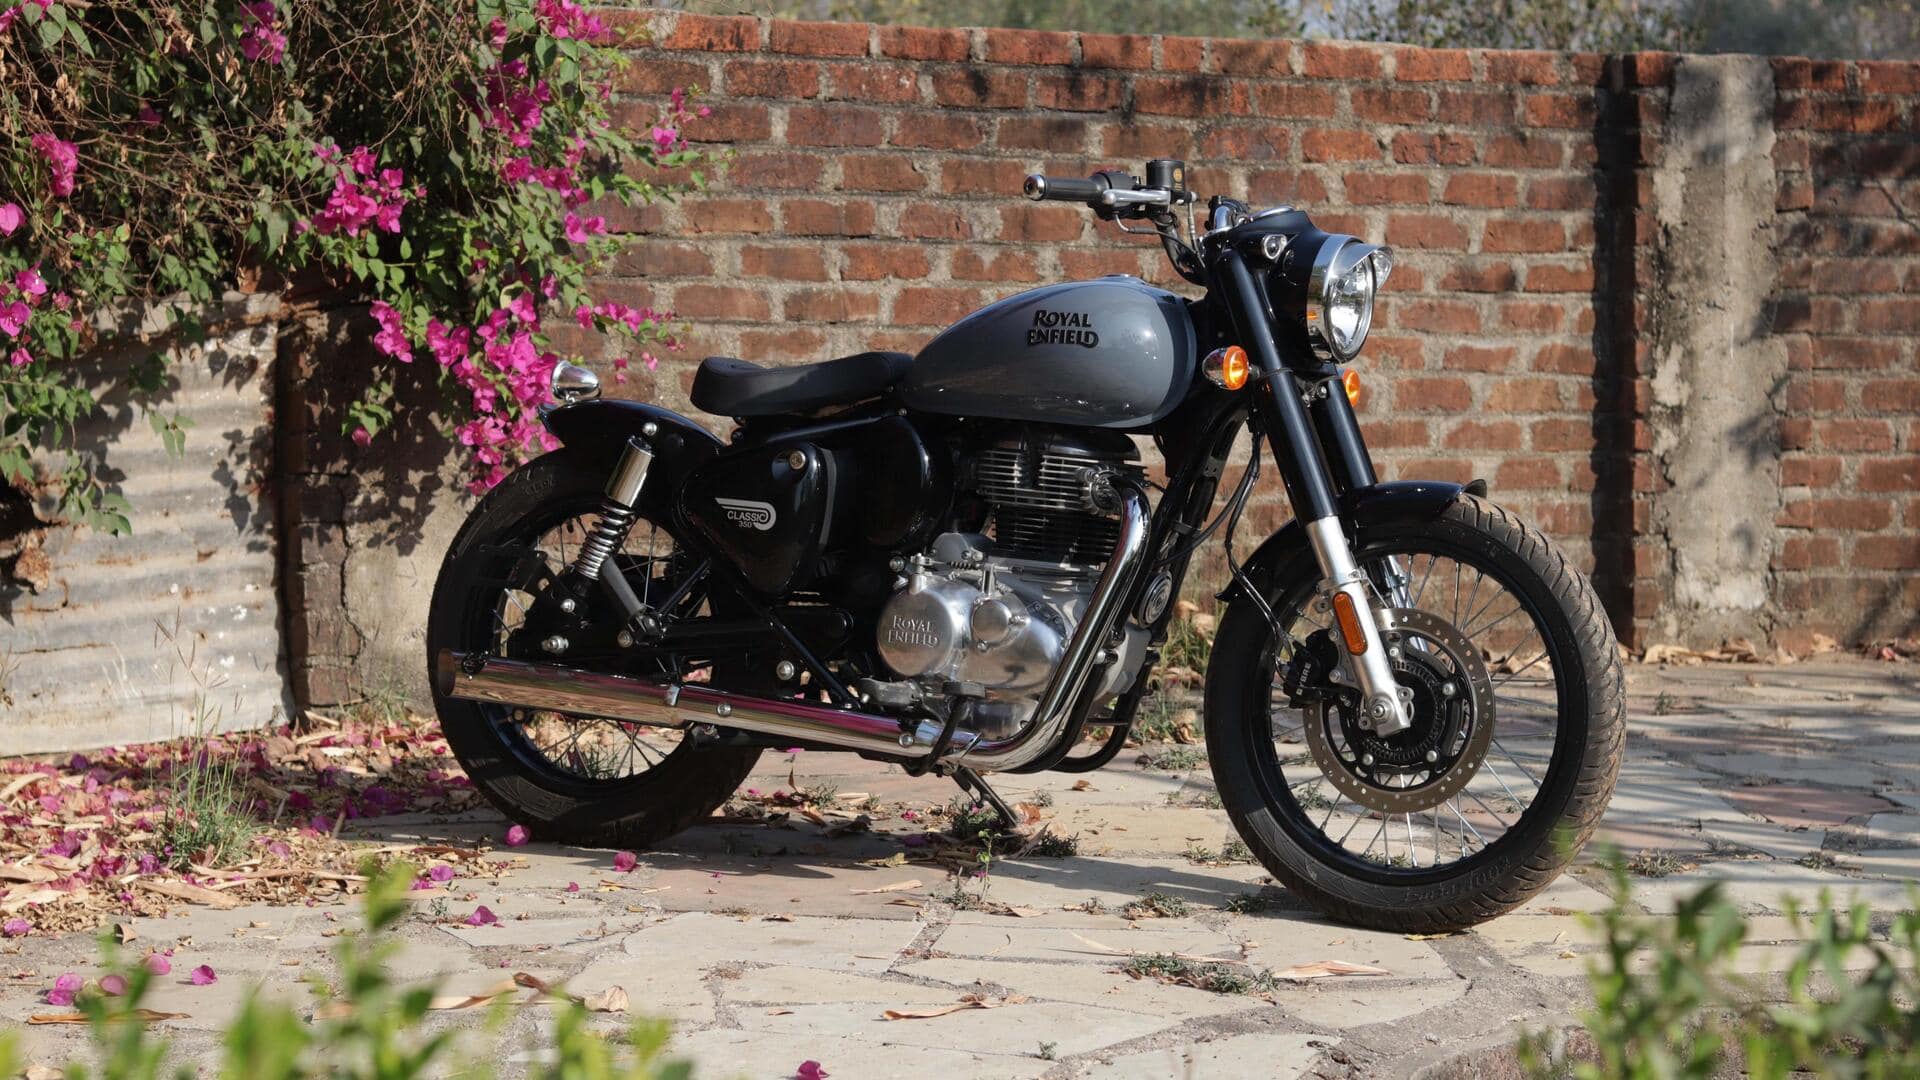 Royal Enfield Shotgun 350 in the works: What to expect